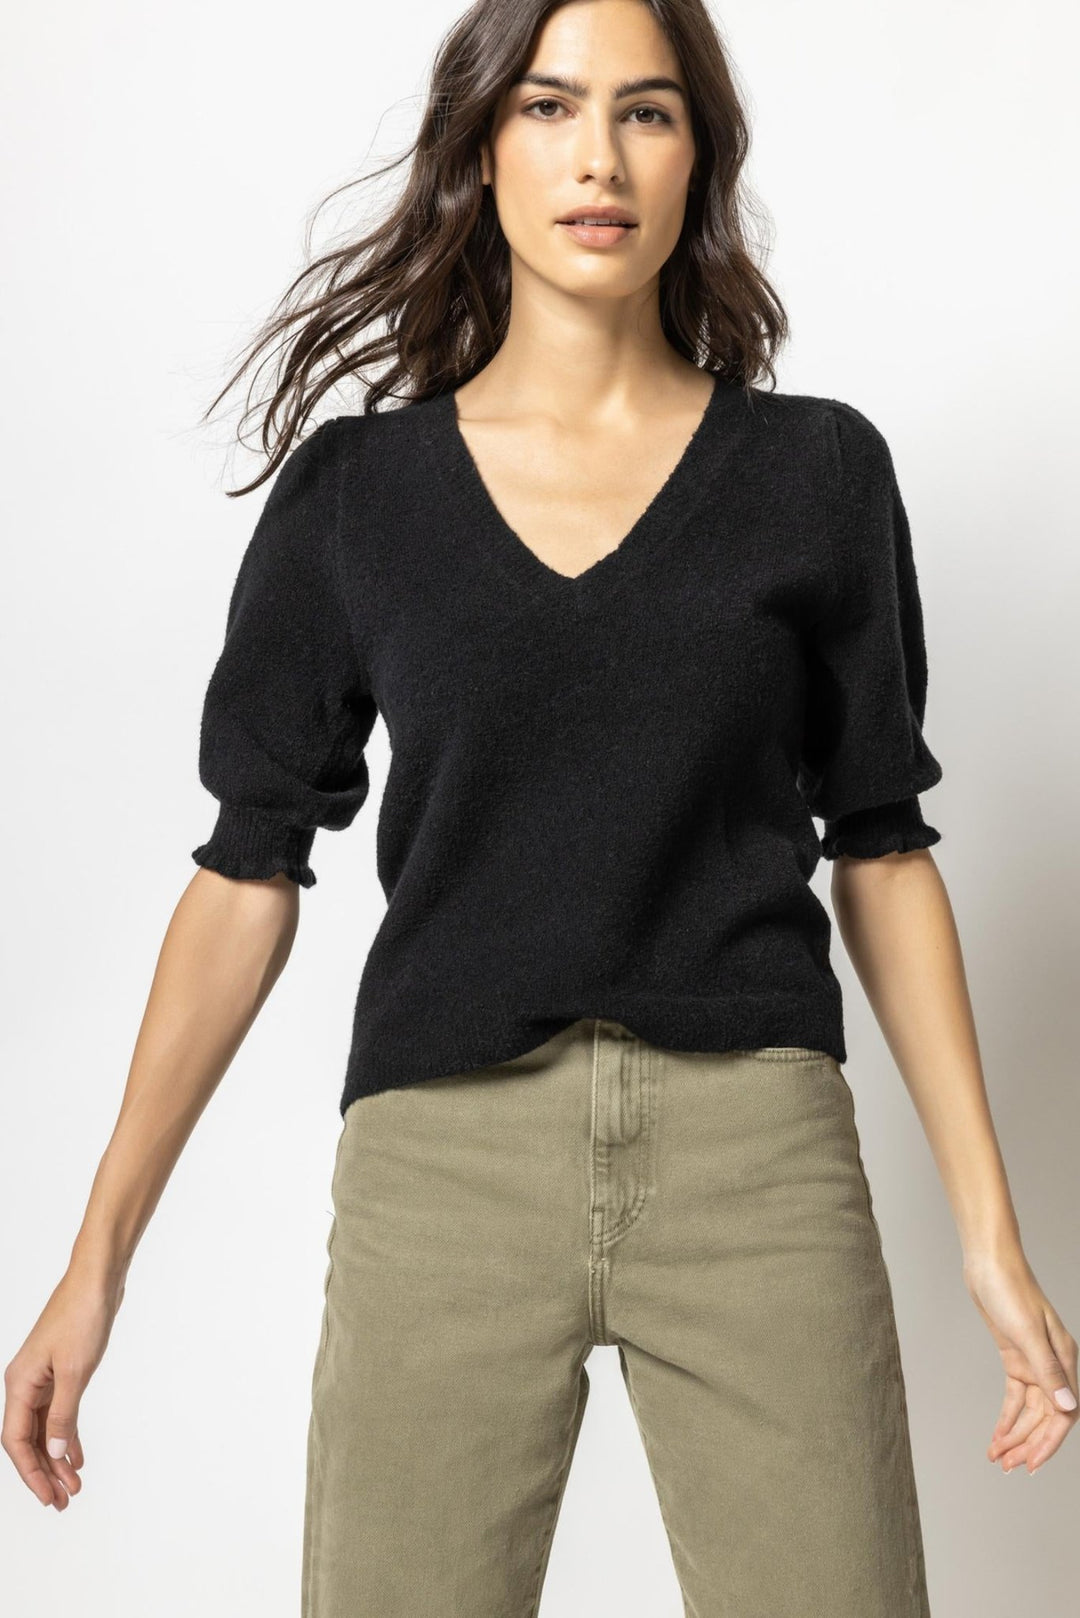 Lilla P - Elbow Sleeve V-Neck Sweater: Black - Shorely Chic Boutique